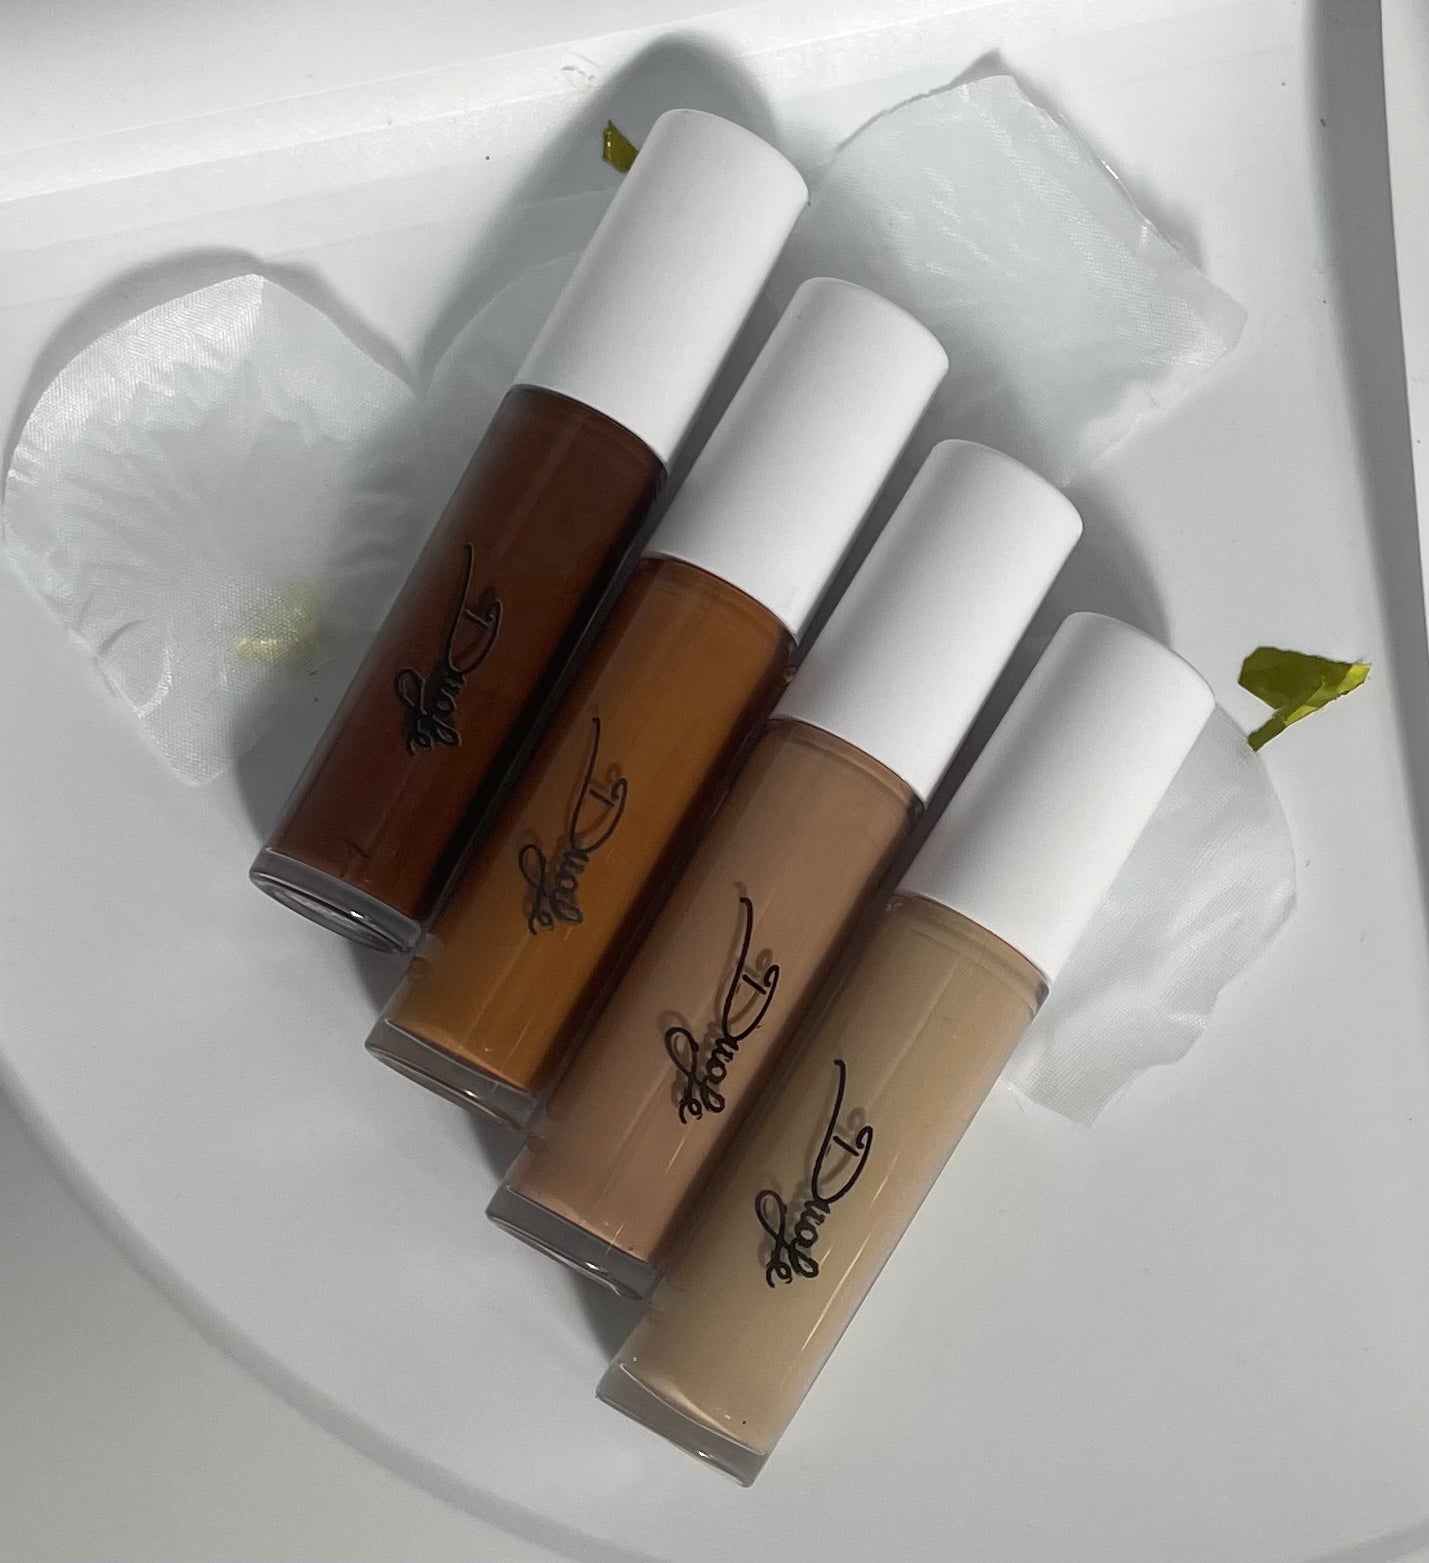 Flawless Hydrating Concealer